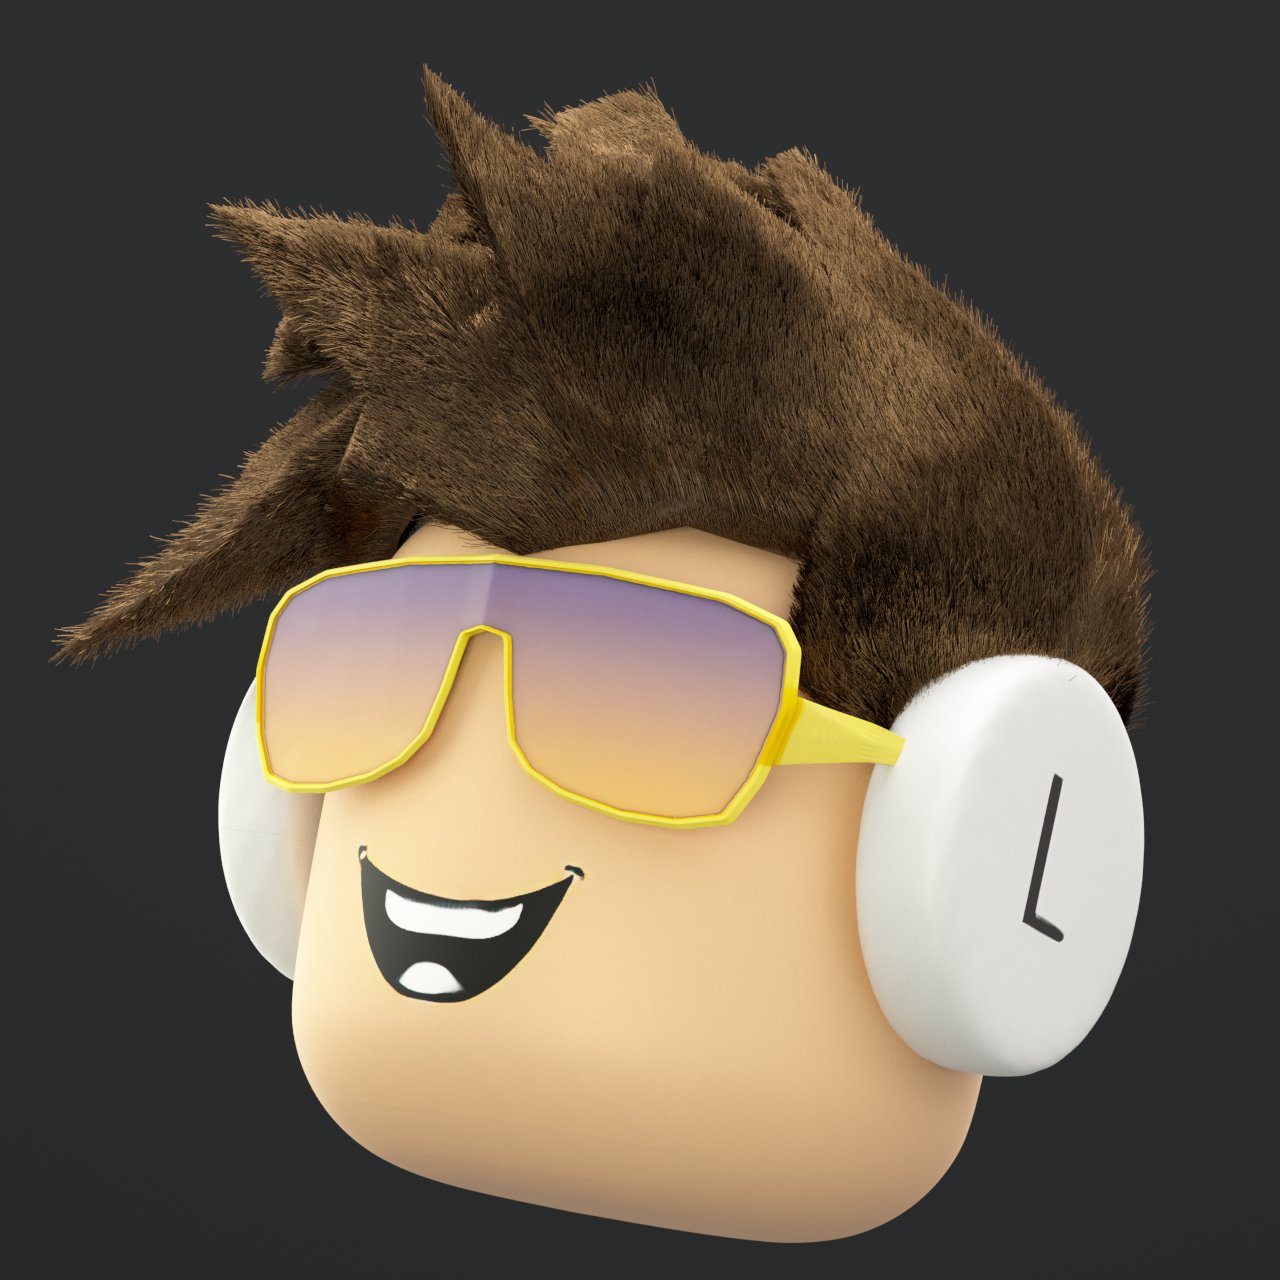 I5k On Twitter Made The Beautiful Hair Even More Beautiful Roblox Robloxdev - i5k on twitter eating simulator part 1 roblox robloxdev